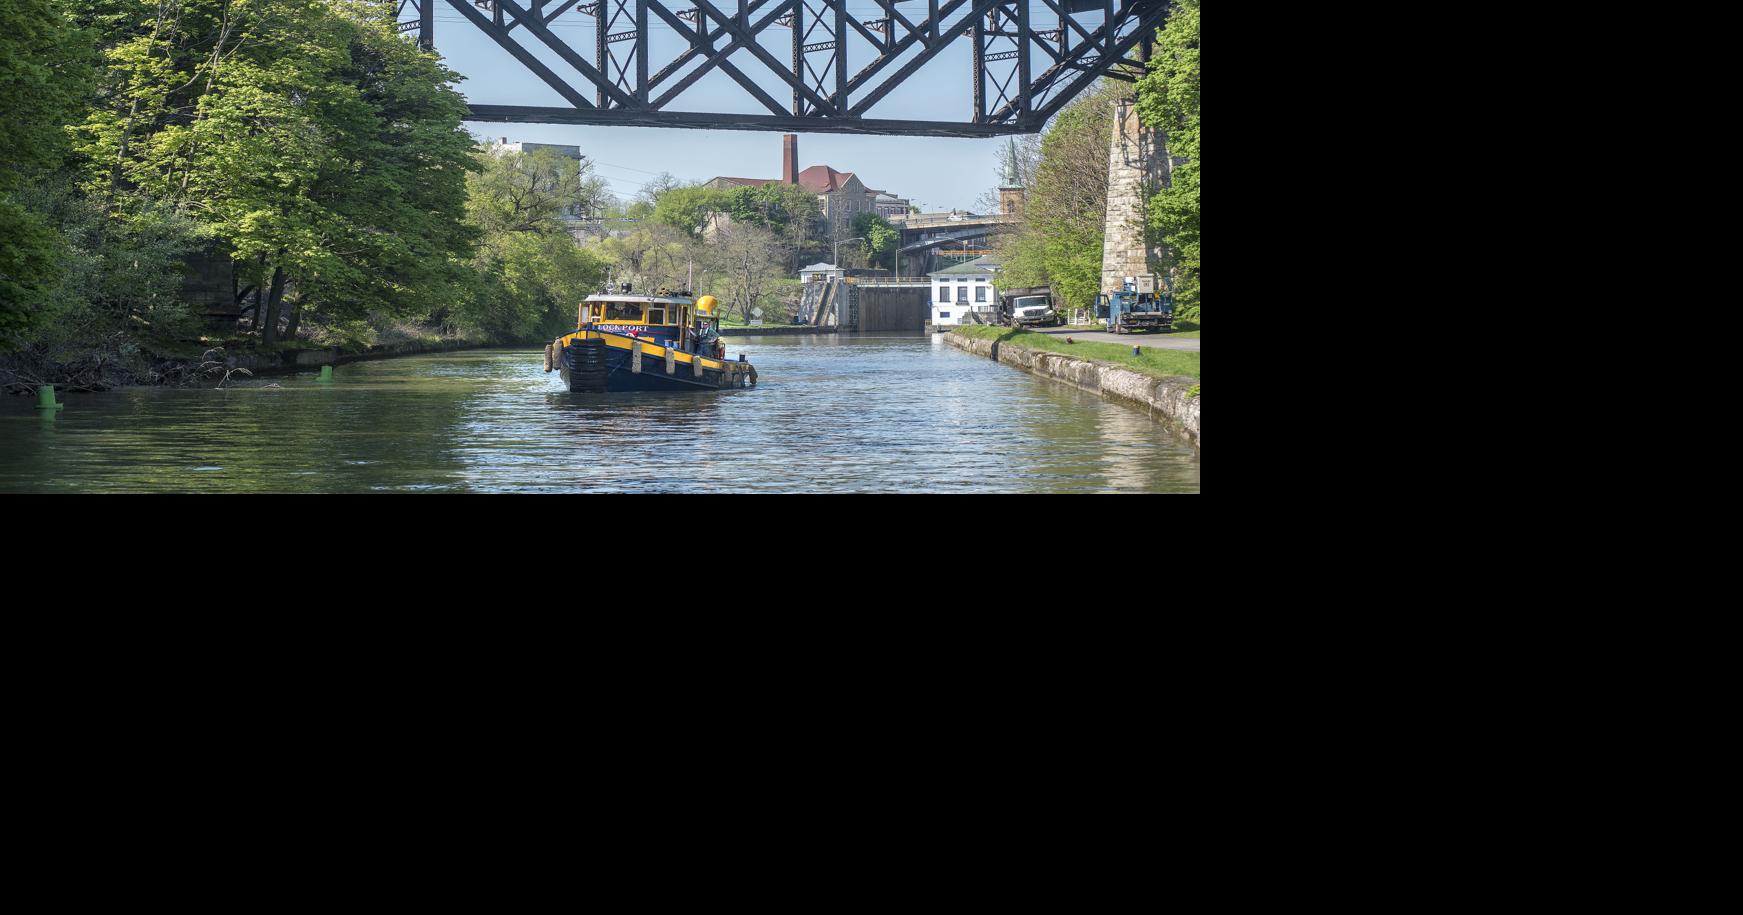 Erie Canal opening celebration set for Saturday Local News niagara